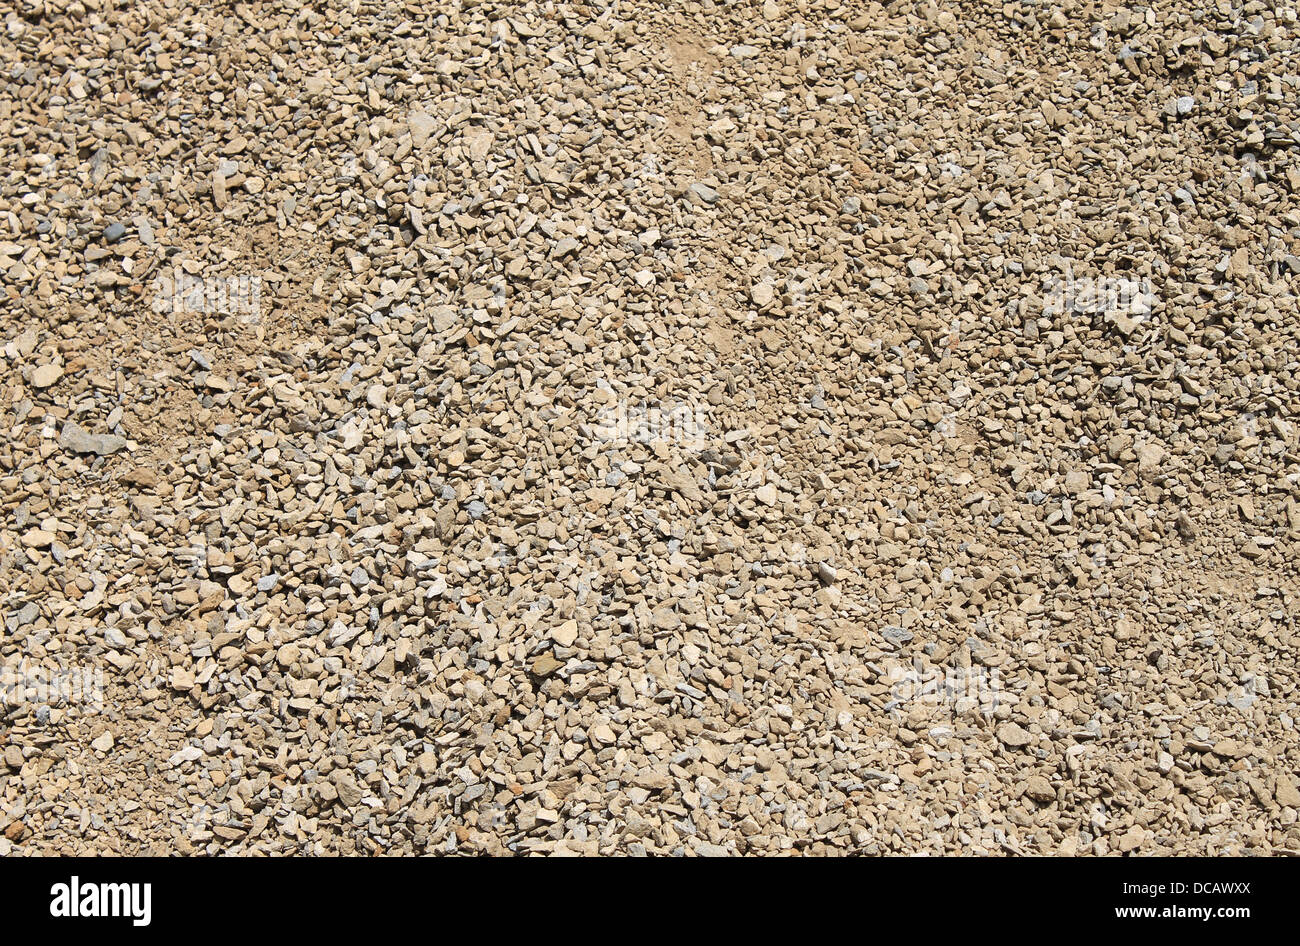 Abstract background of small stones and gravel. Stock Photo